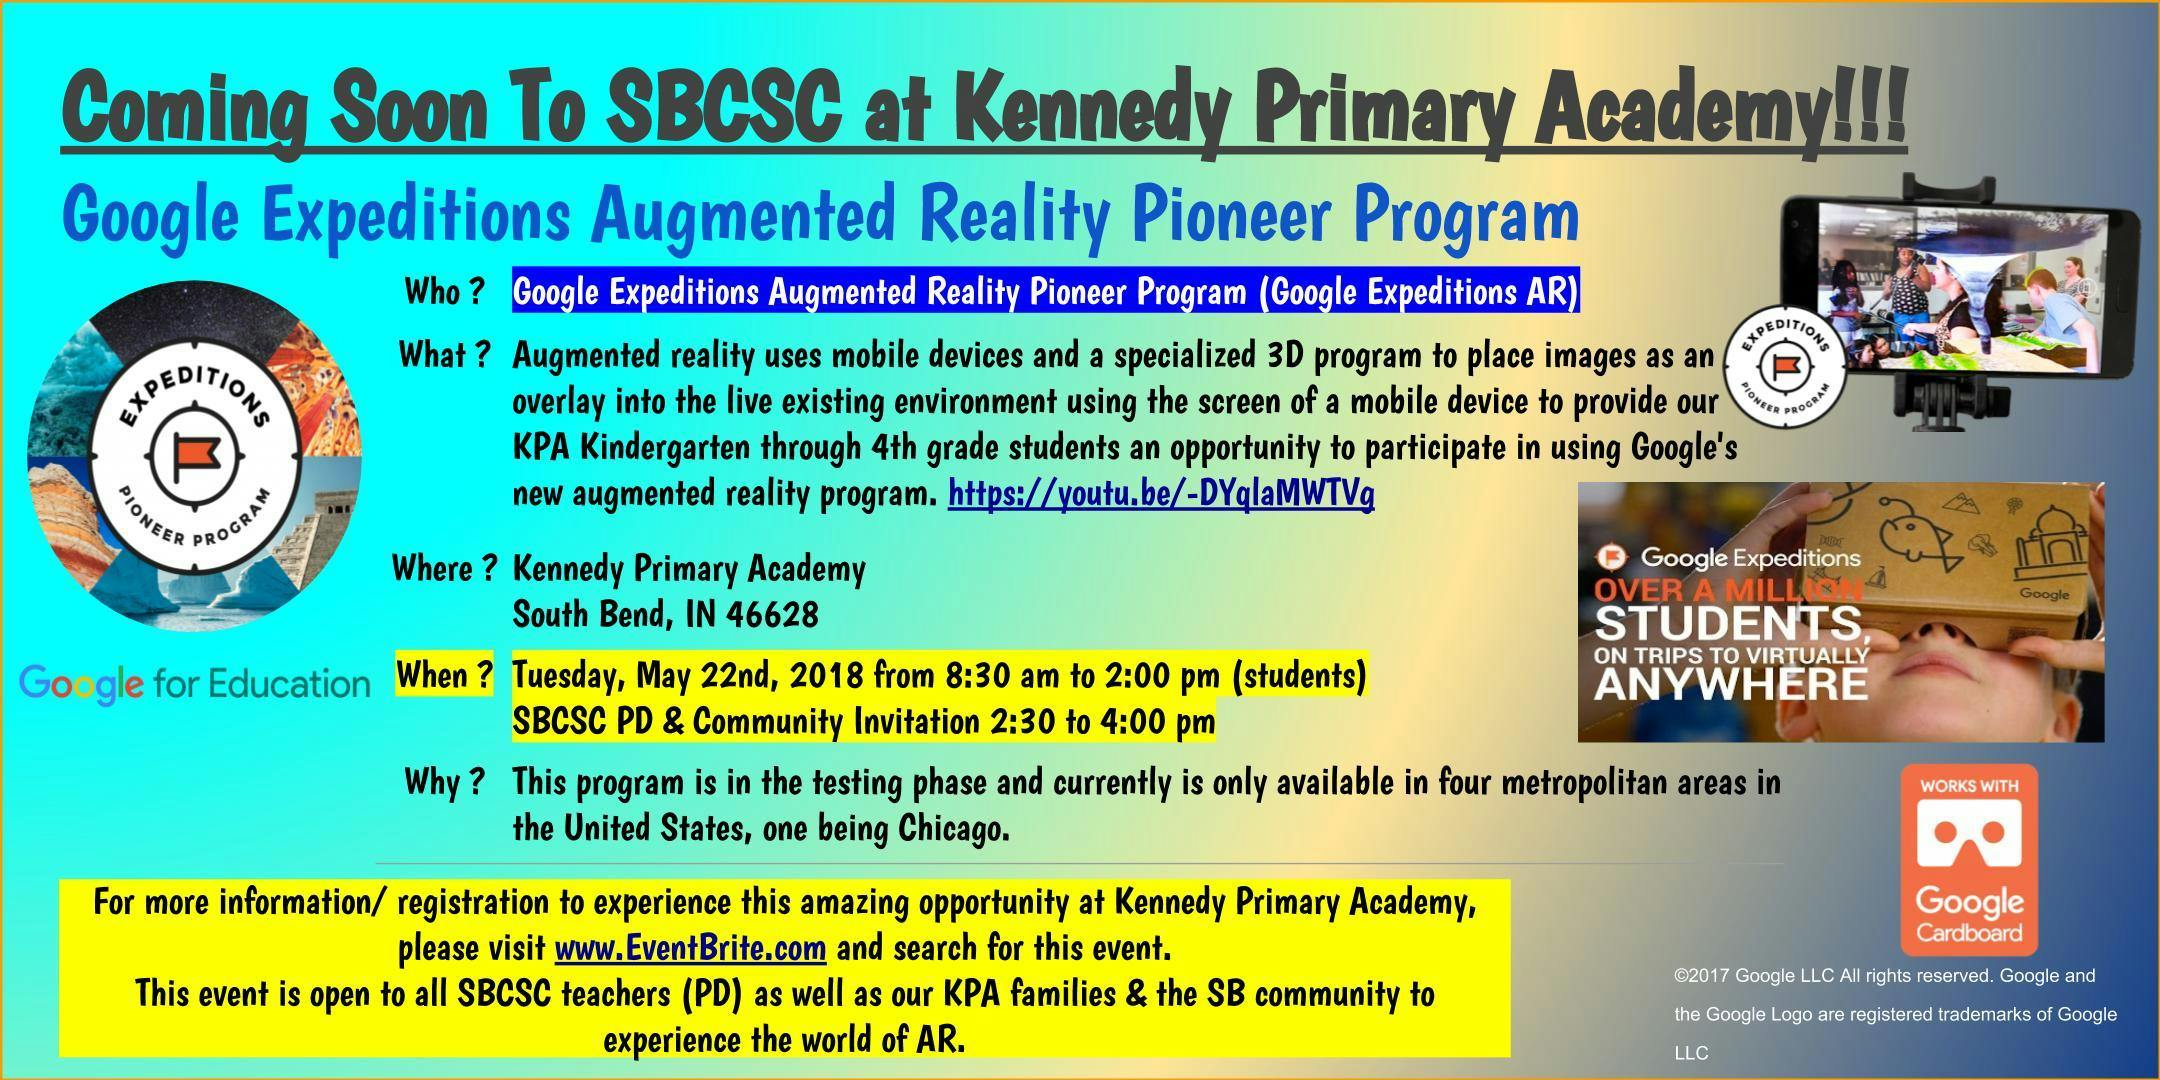 FREE- Google Expeditions AR (Augmented Reality) Demonstration - (6 - 30 minute sessions) - Open To Our SB Community